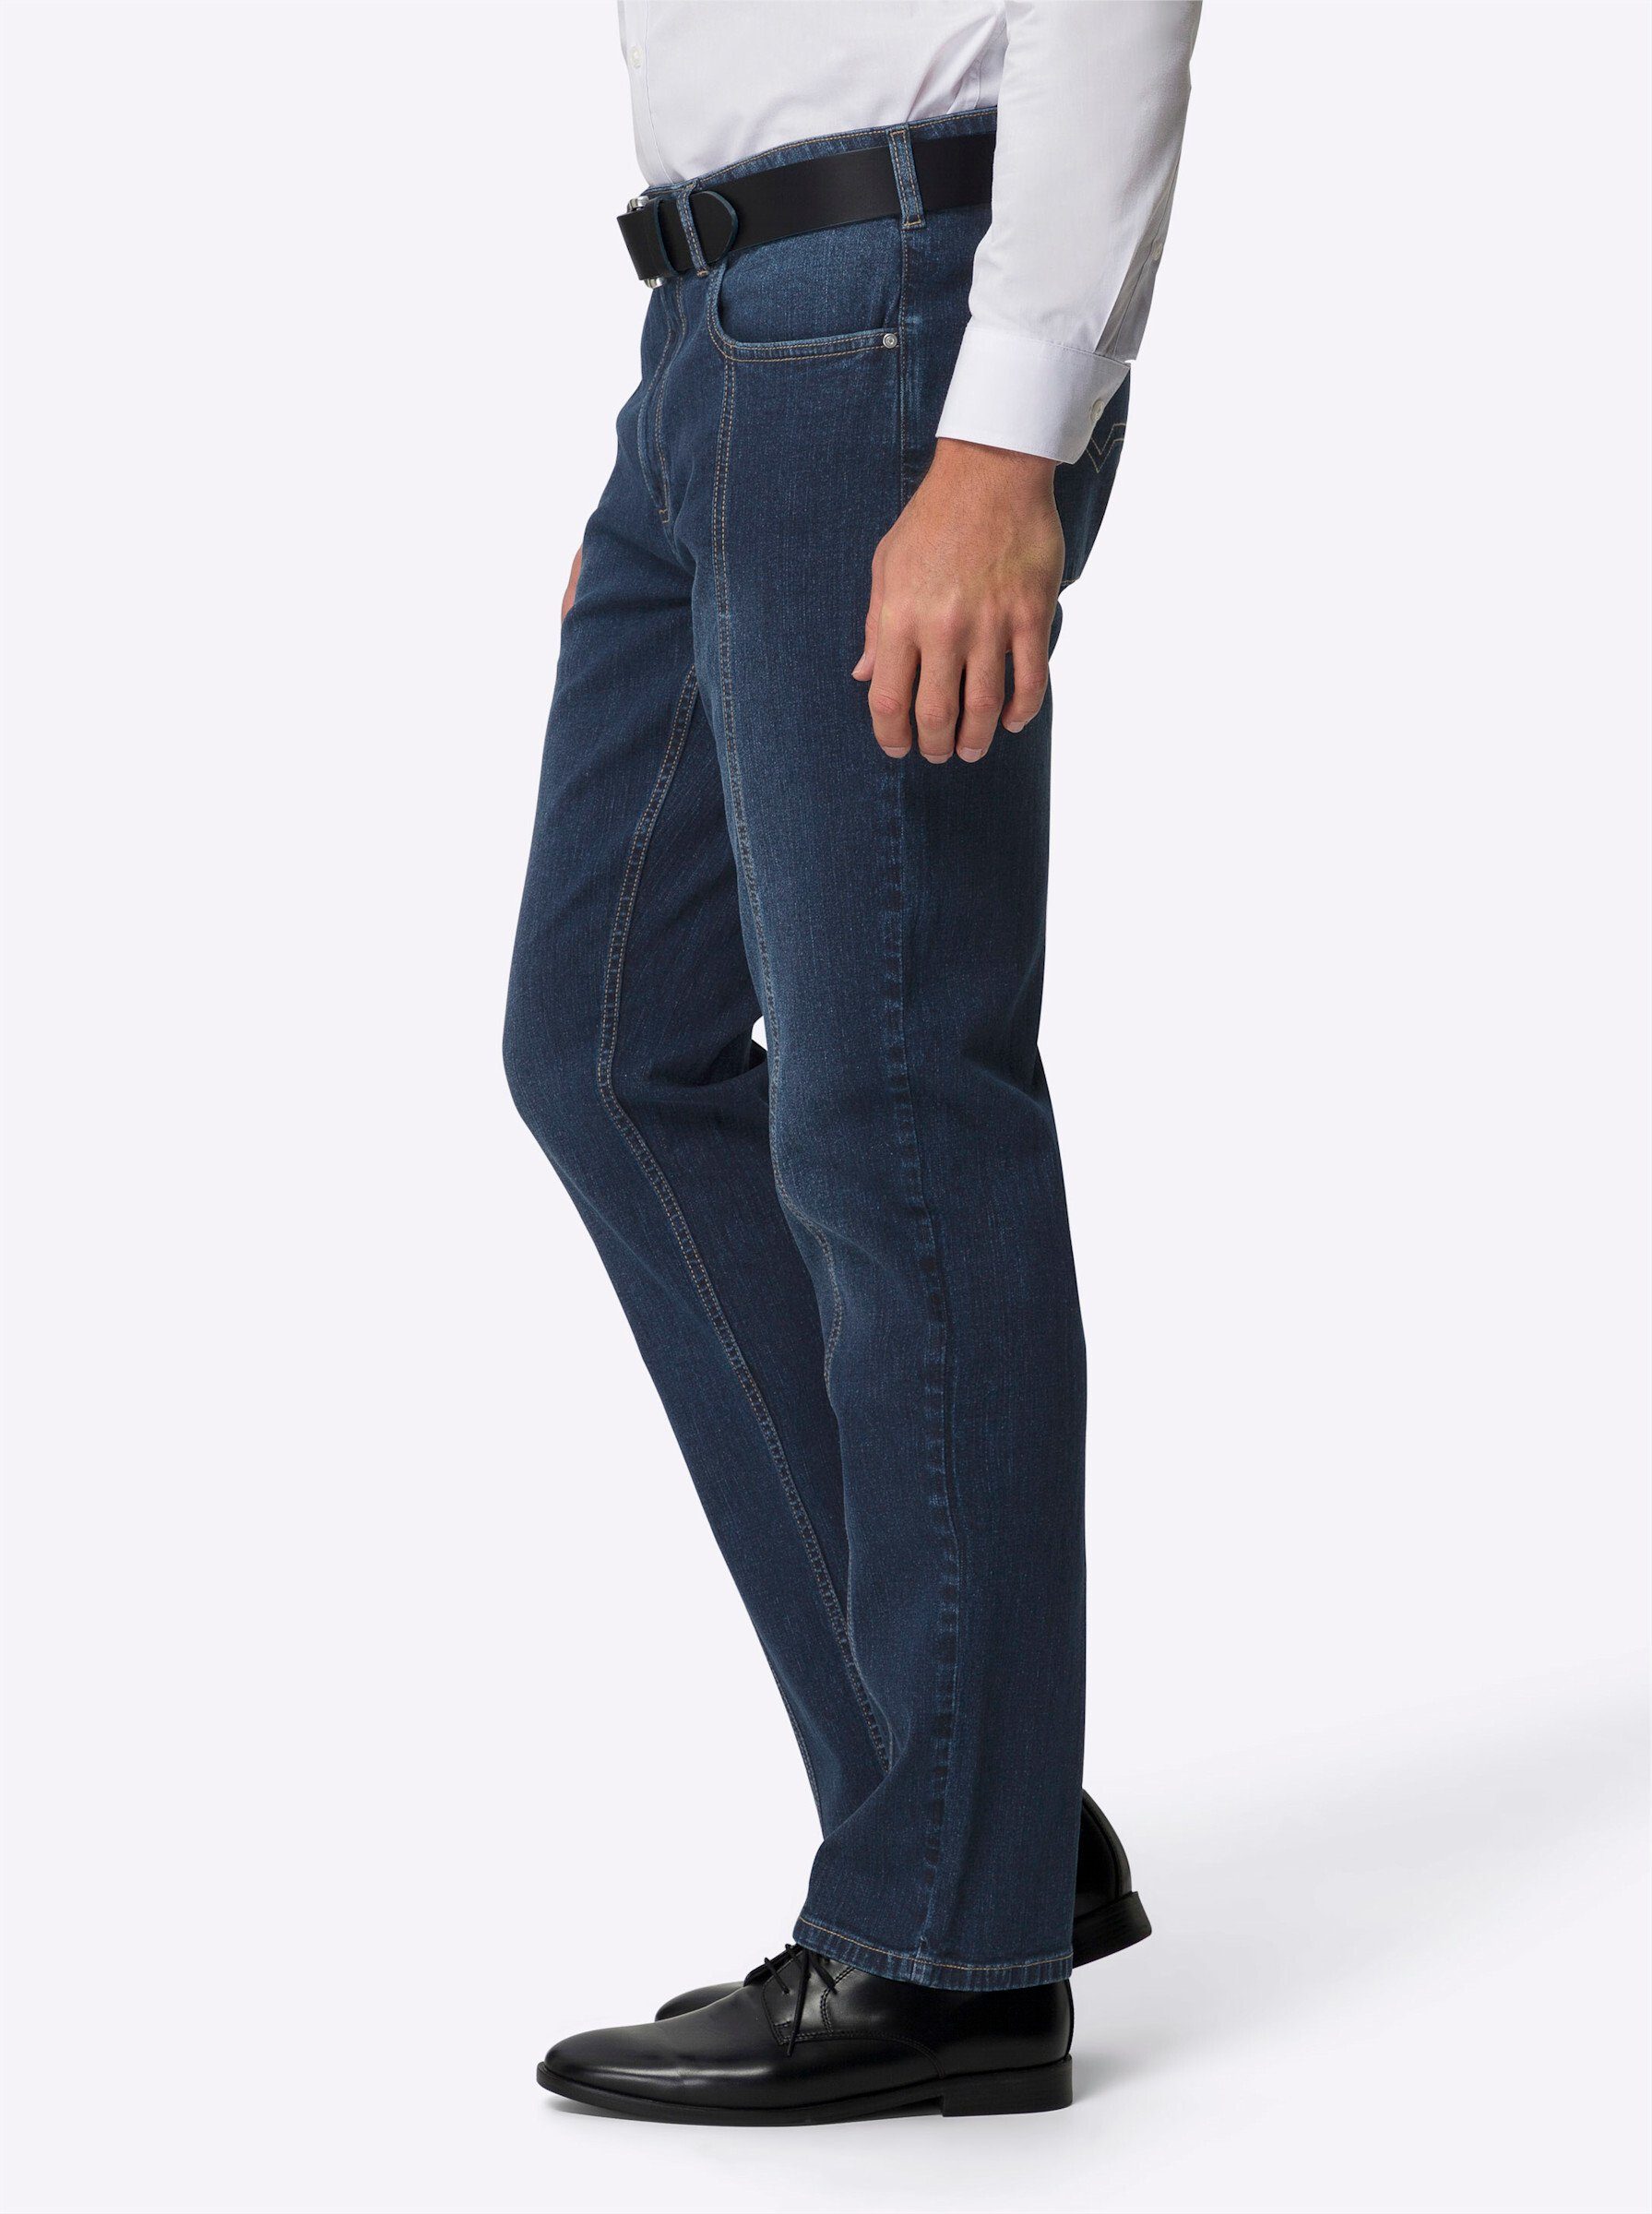 Jeans Sieh blue-stone-washed an! Bequeme